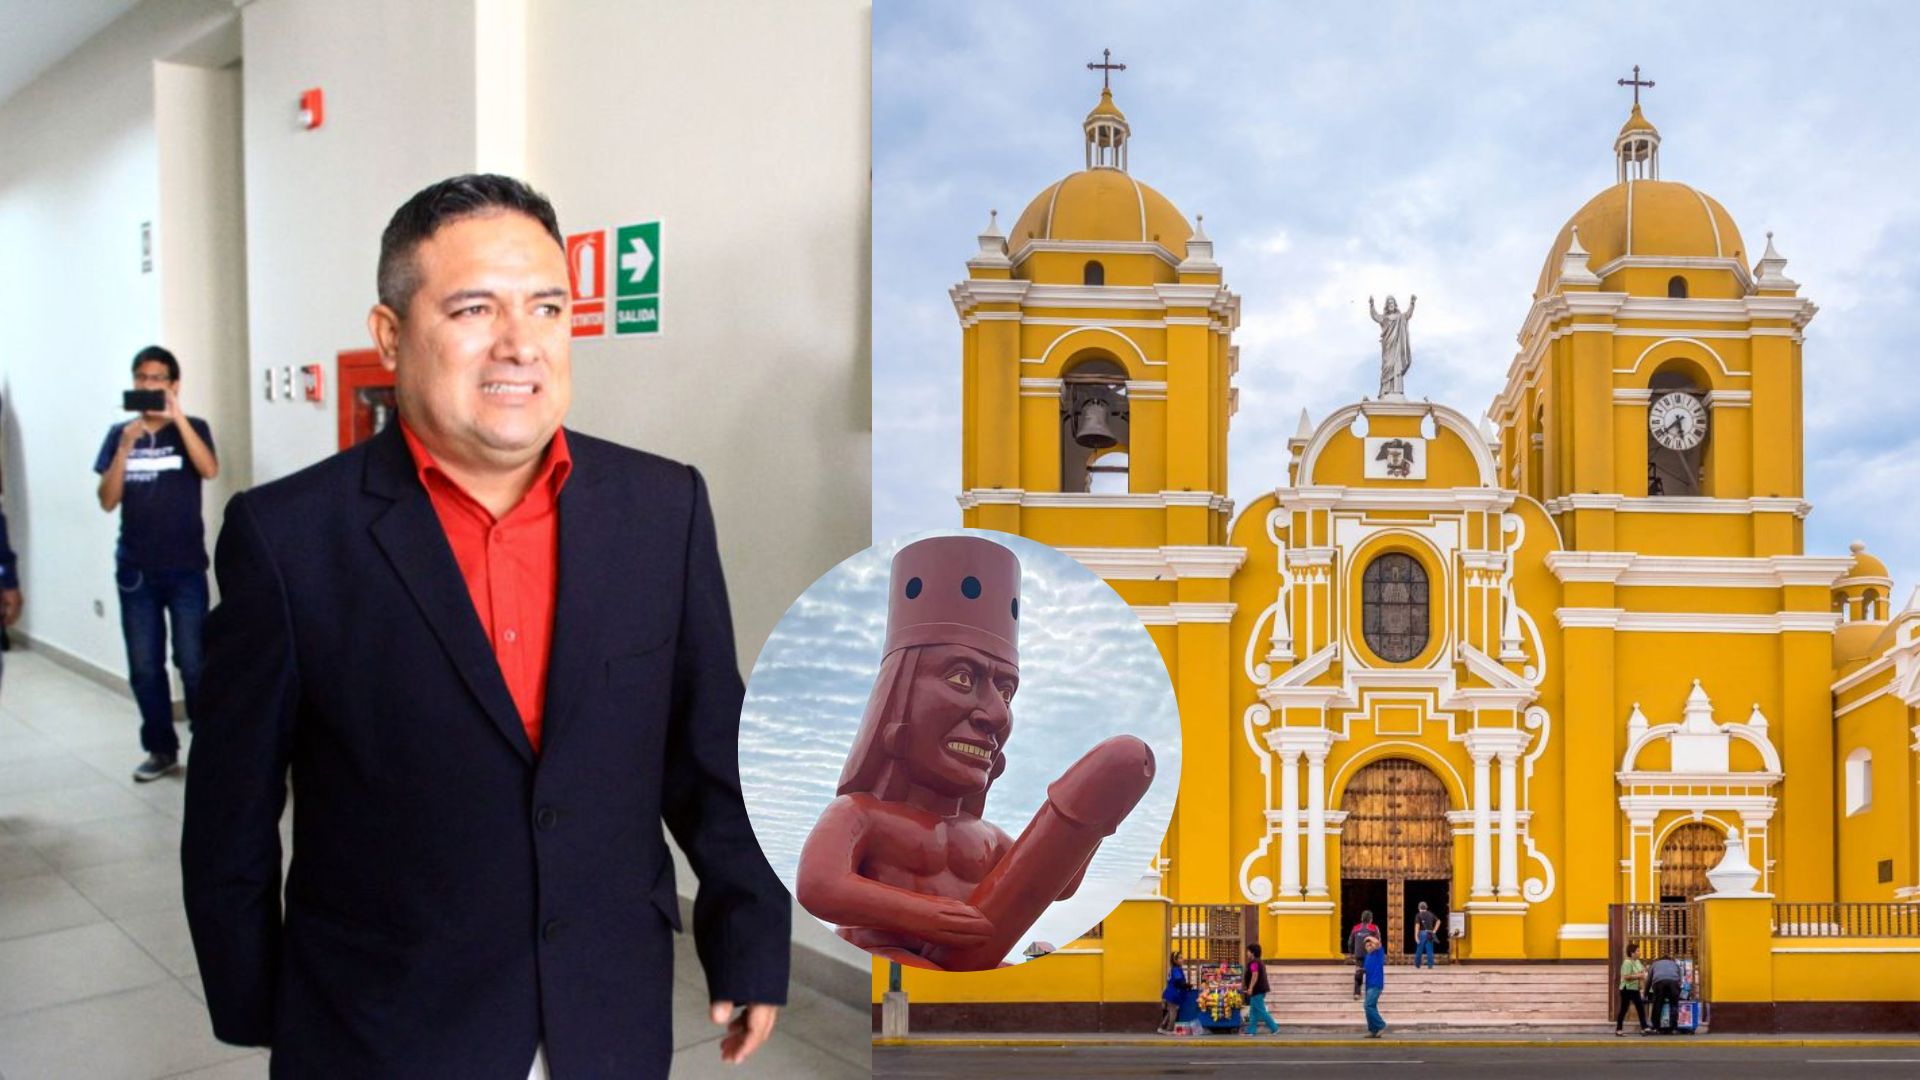 César Fernández, the controversial mayor of the Moche erotic huacos, is the new mayor of Trujillo